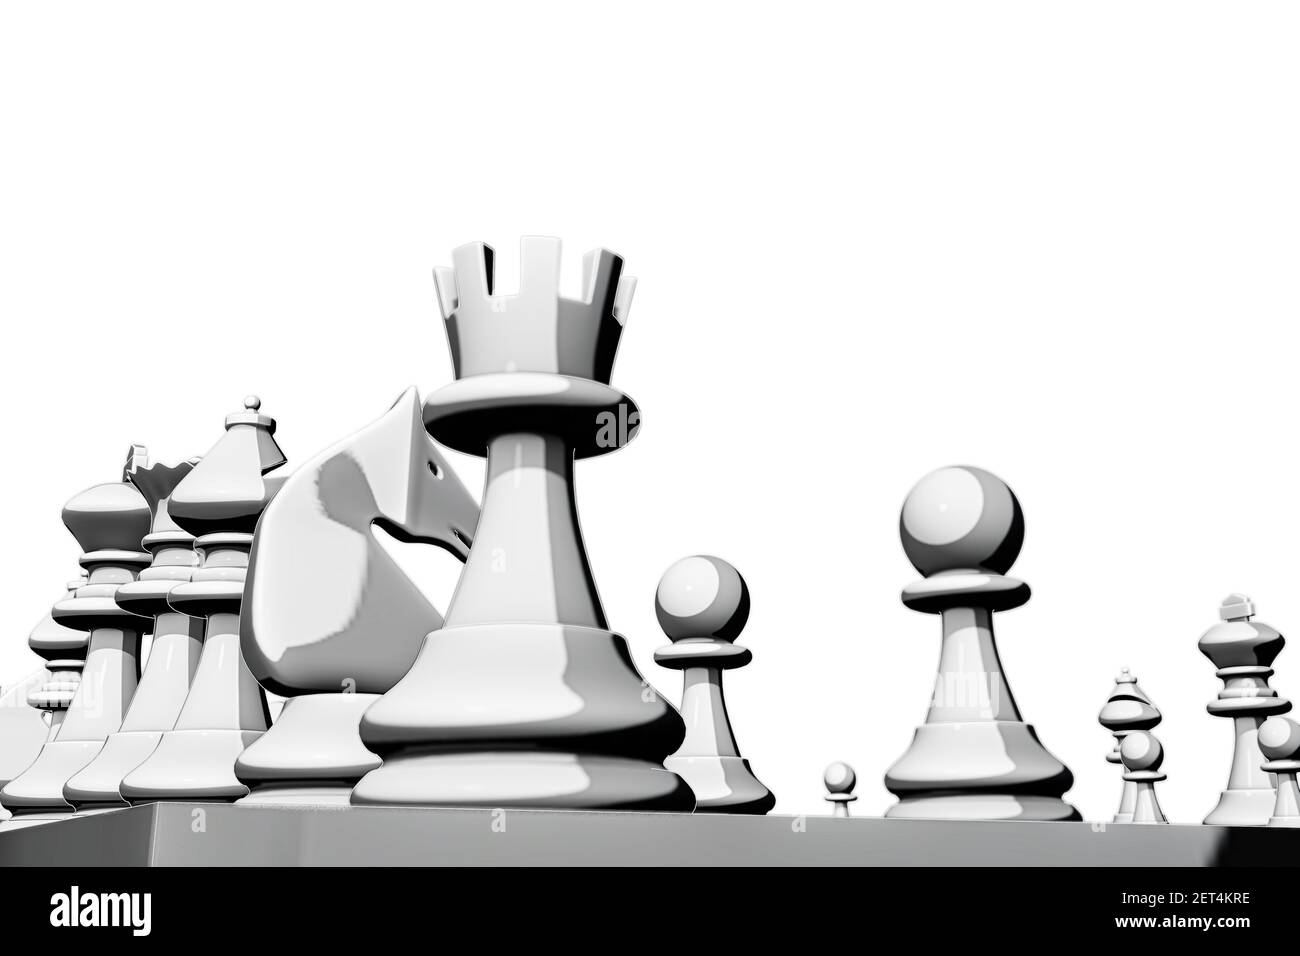 Compass Chess Pieces On White Background Stock Photo 666437362